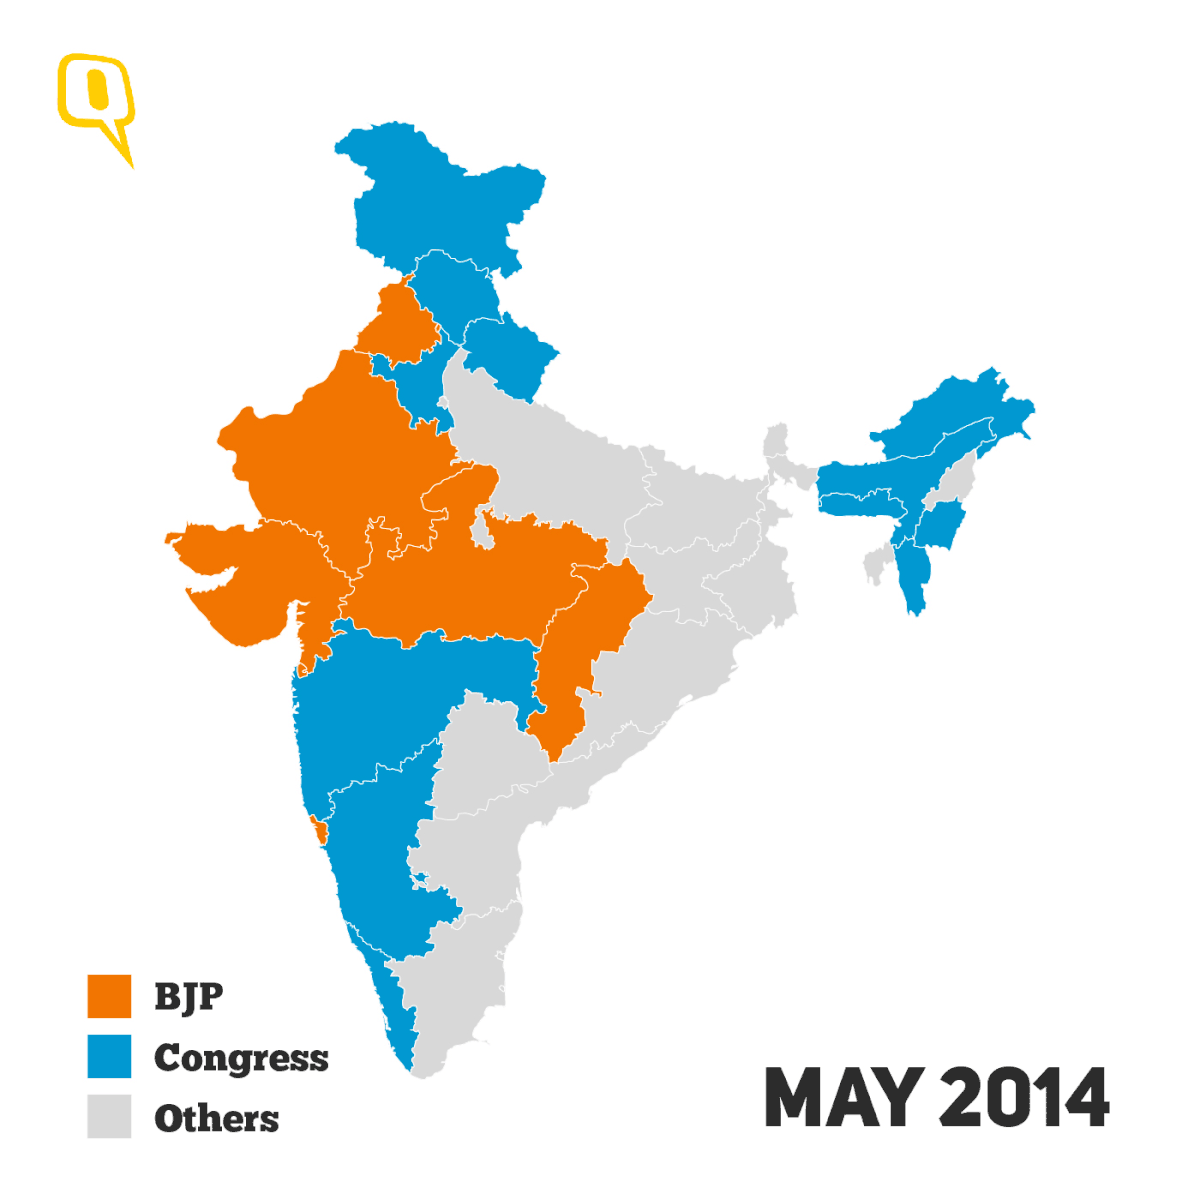 After bagging Tripura, the BJP now holds 21 states, an indication of the increasing saffronisation of India. 